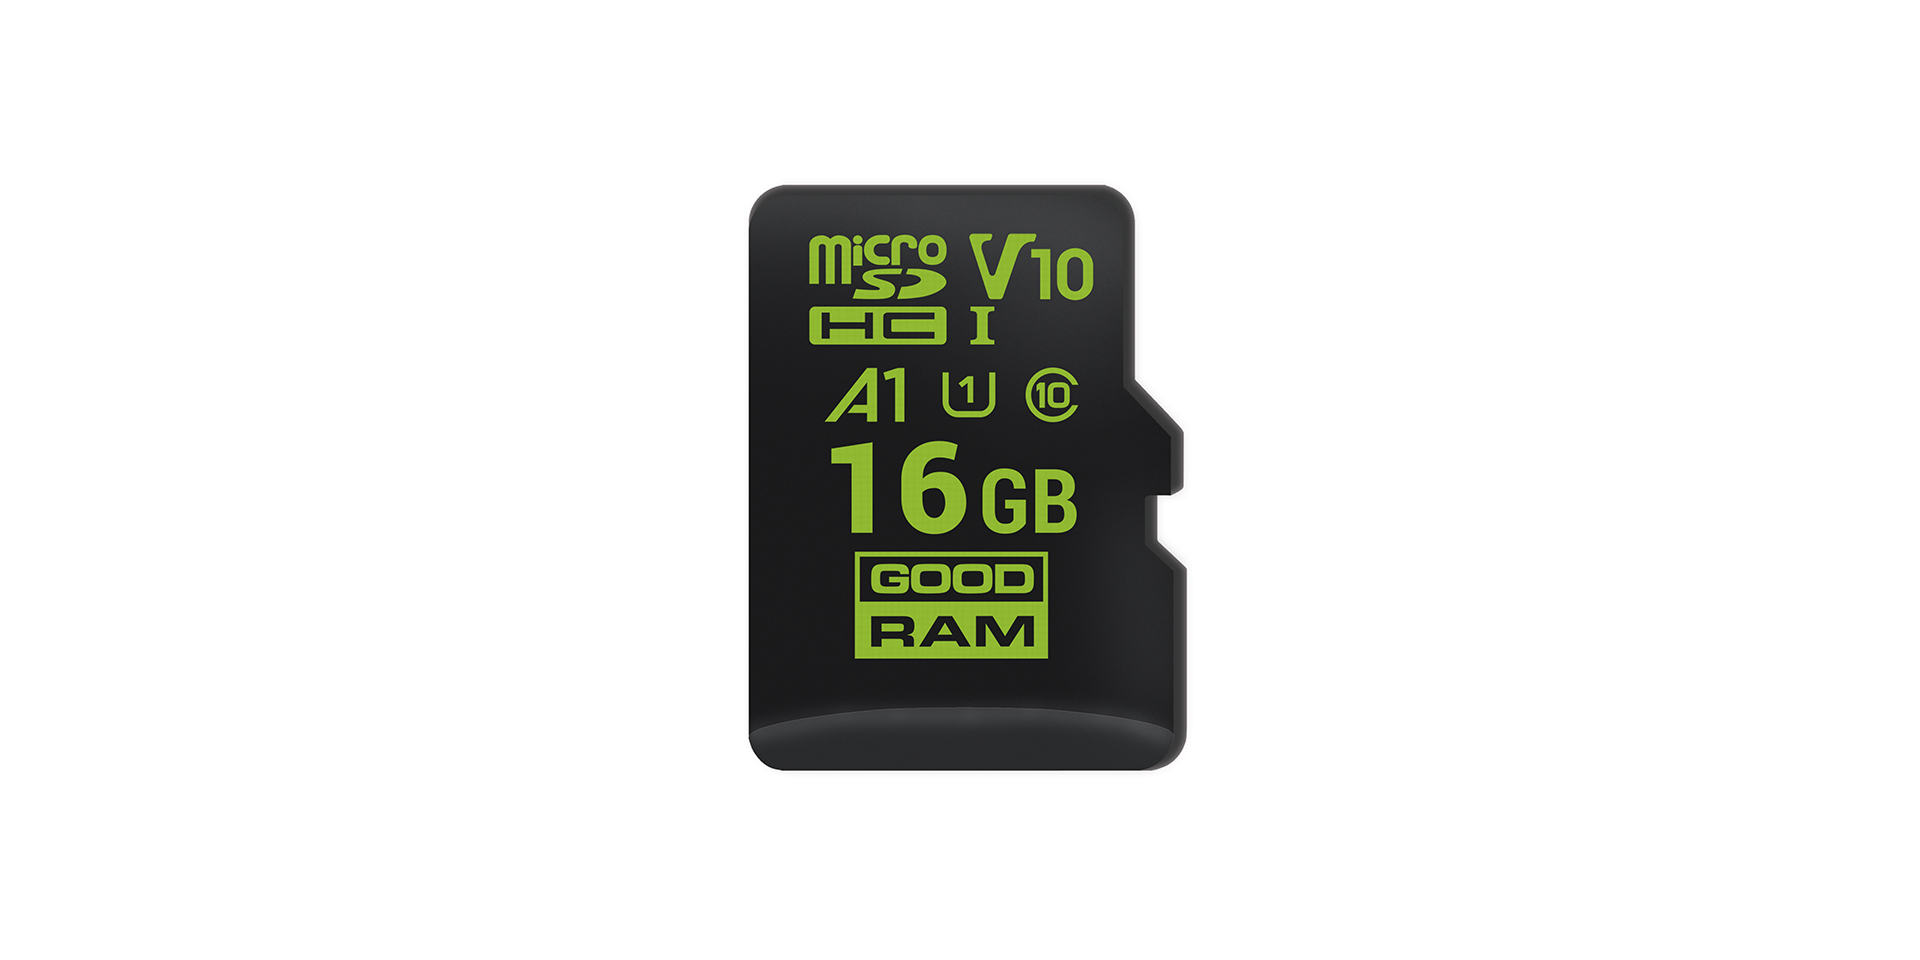 Microcard pour smartphones Android